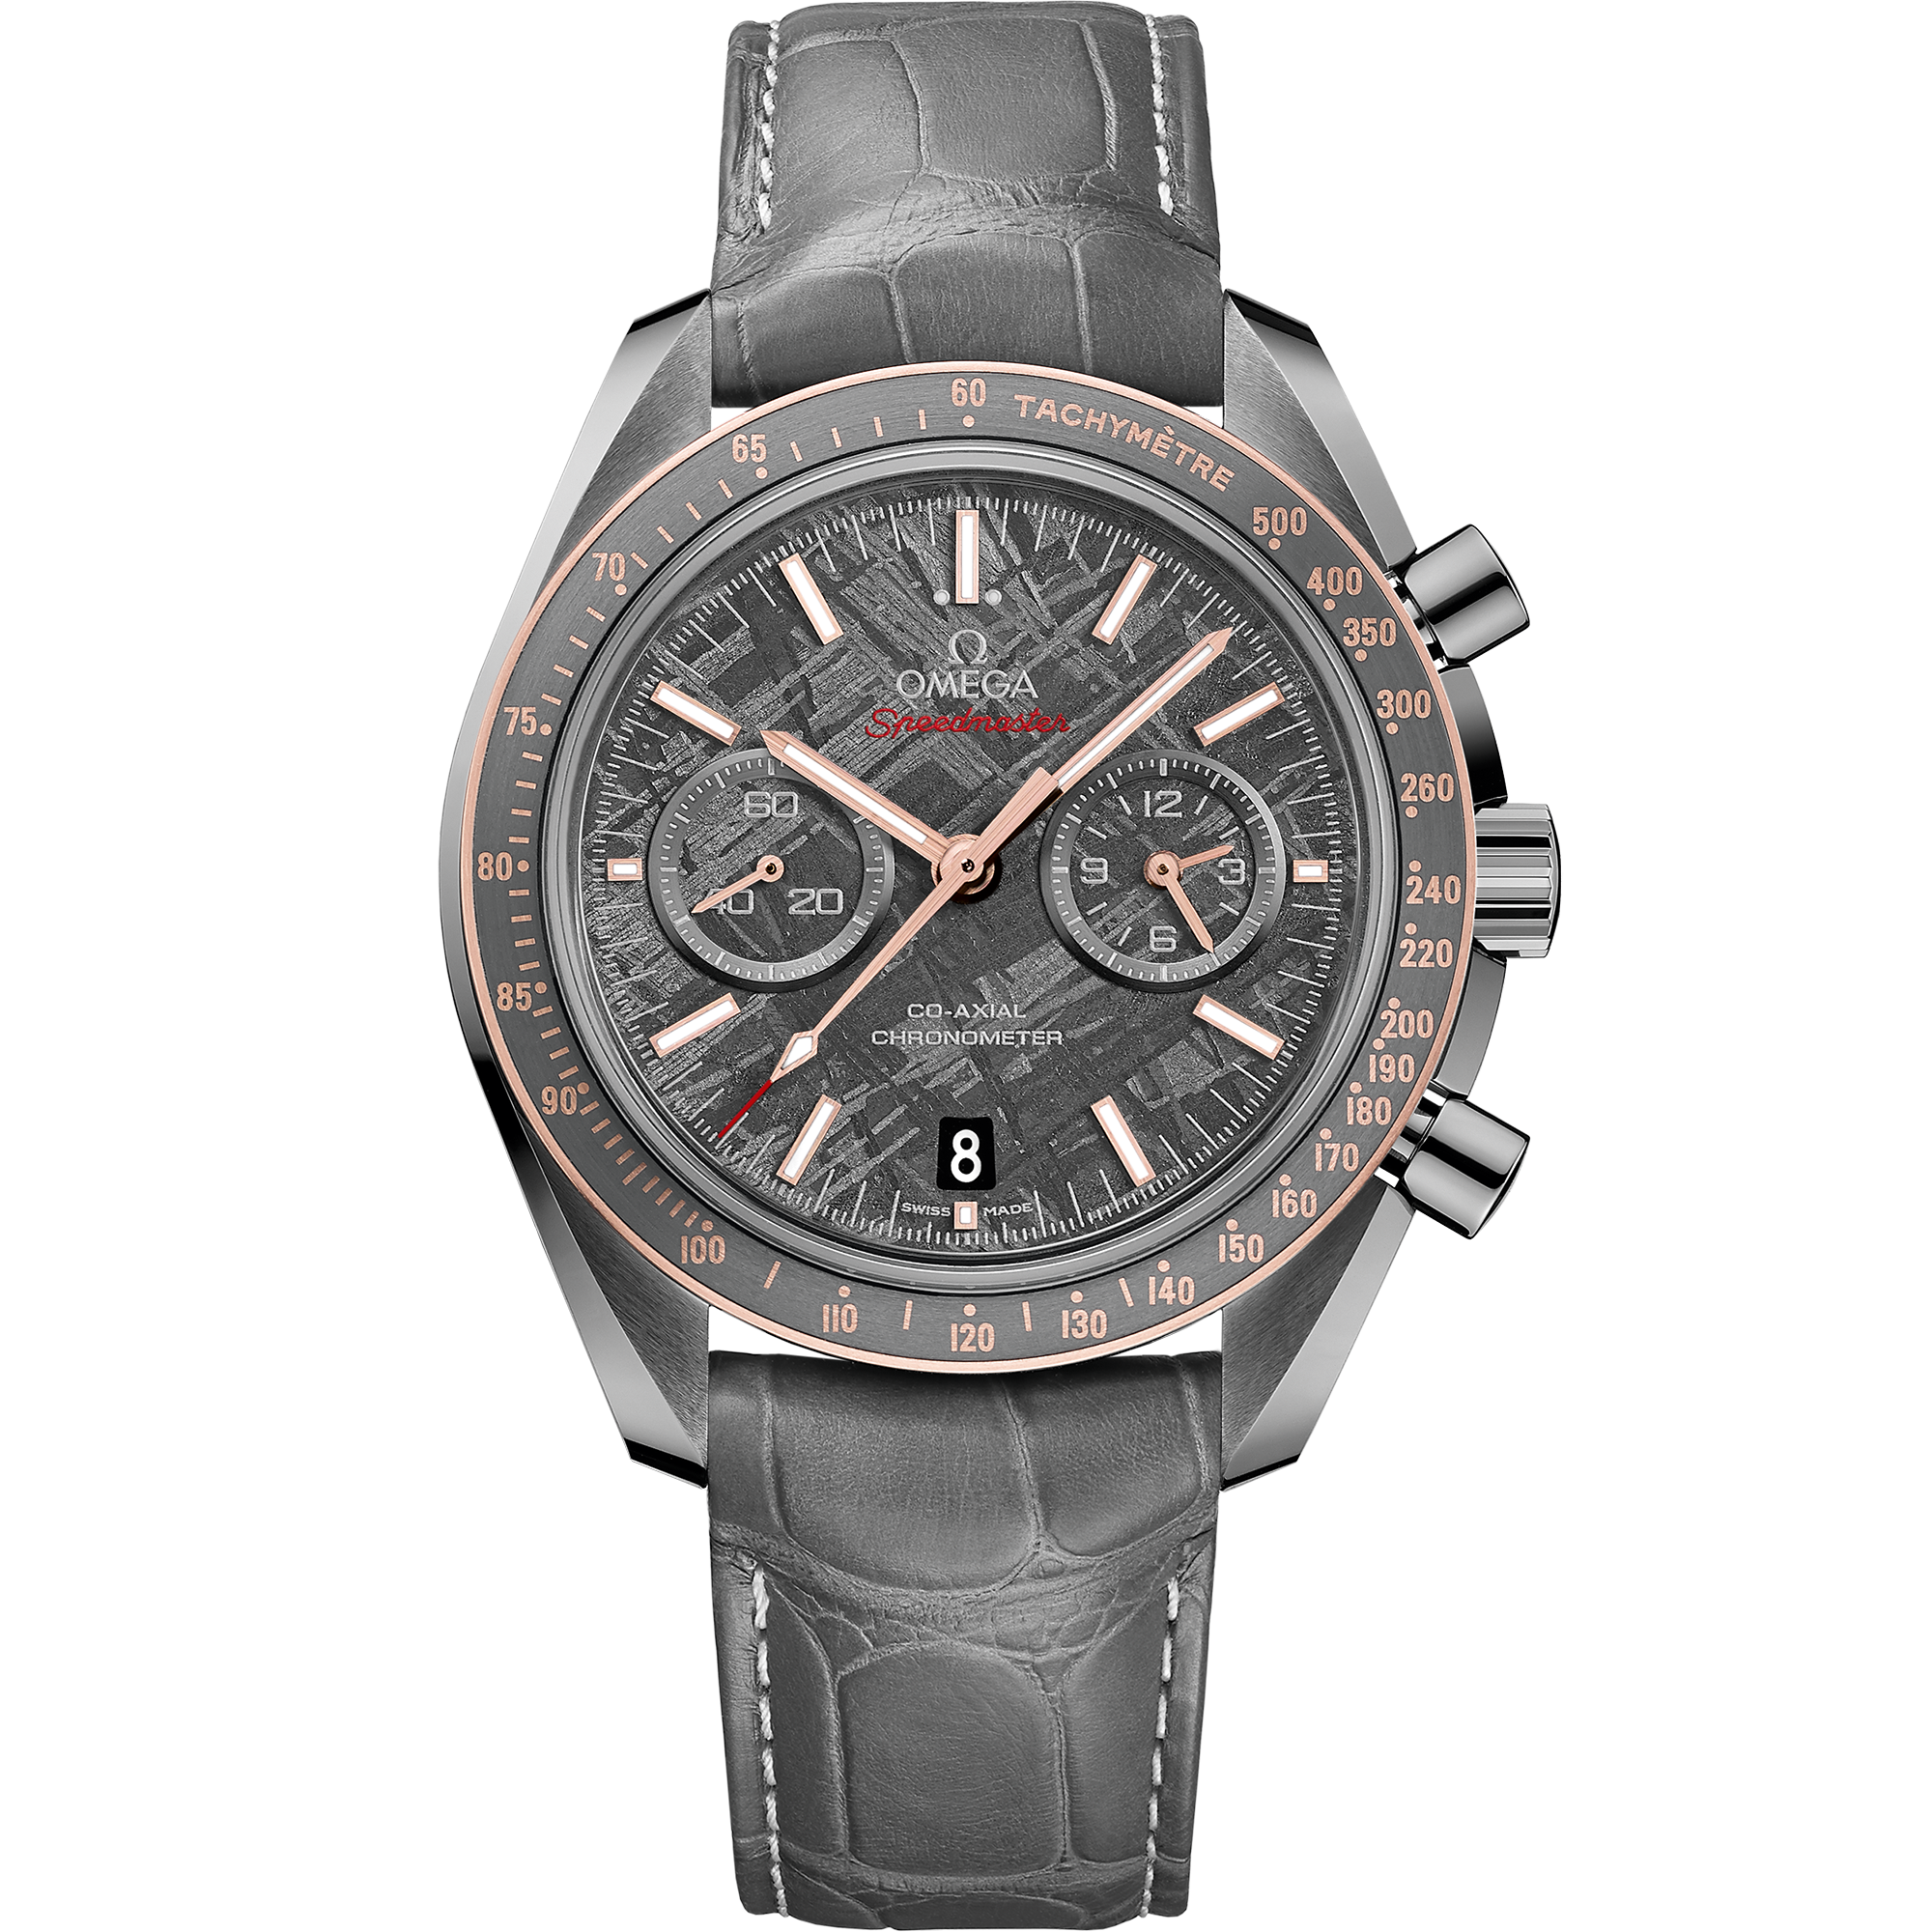 Speedmaster Dark Side of the Moon 44.25 mm, grey ceramic on leather strap with foldover clasp - 311.63.44.51.99.001